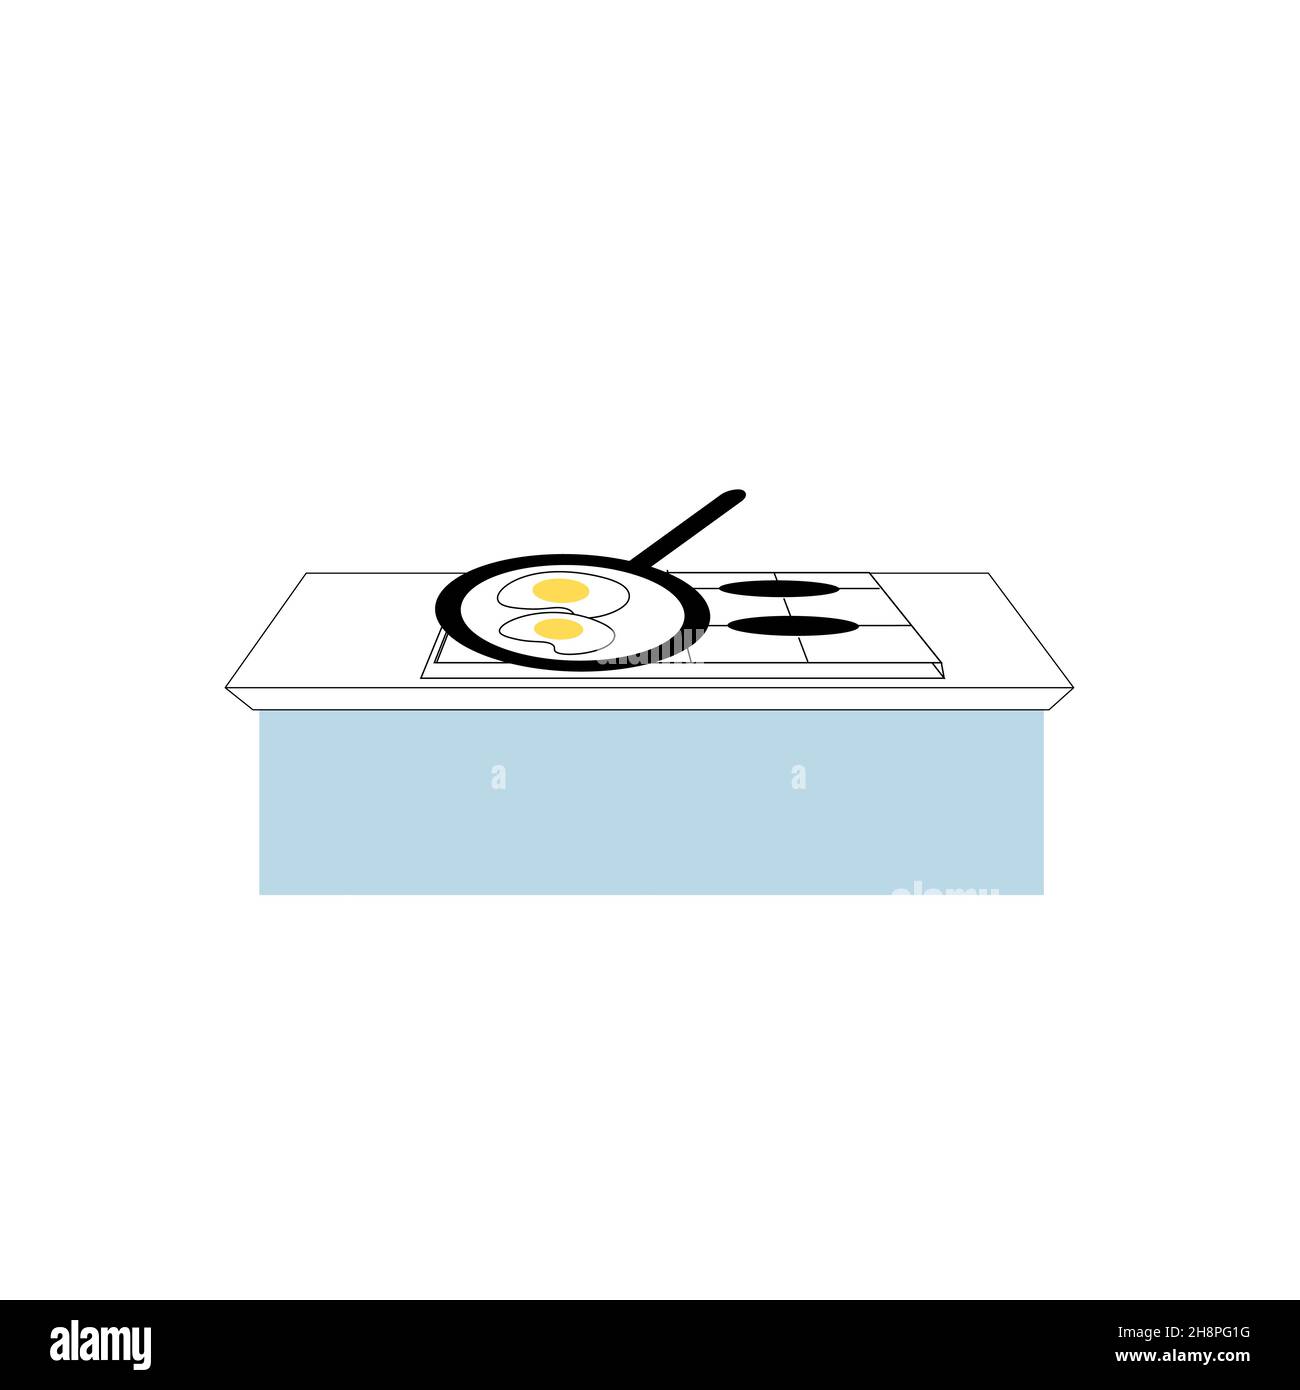 Flat cartoon frying pan on stove,home furniture,kitchen appliances interior elements vector illustration concept Stock Vector